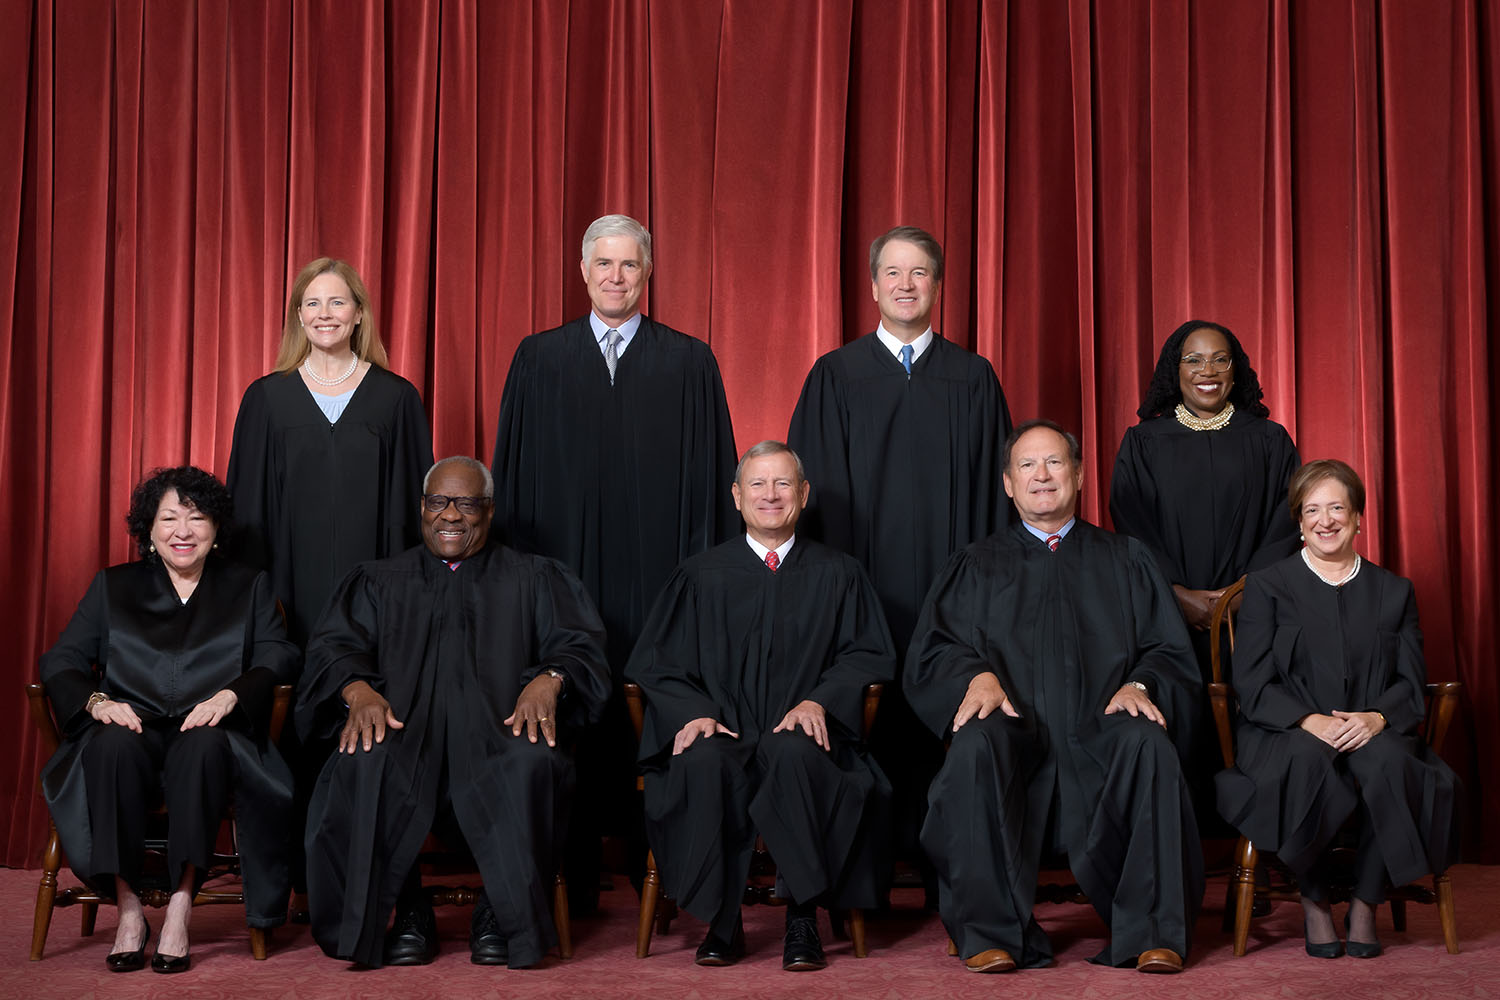 Formal group photograph of the Supreme Court as it was been comprised on June 30, 2022 after Justice Ketanji Brown Jackson joined the Court. The Justices are posed in front of red velvet drapes and arranged by seniority, with five seated and four standing. Credit: Fred Schilling, Collection of the Supreme Court of the United States